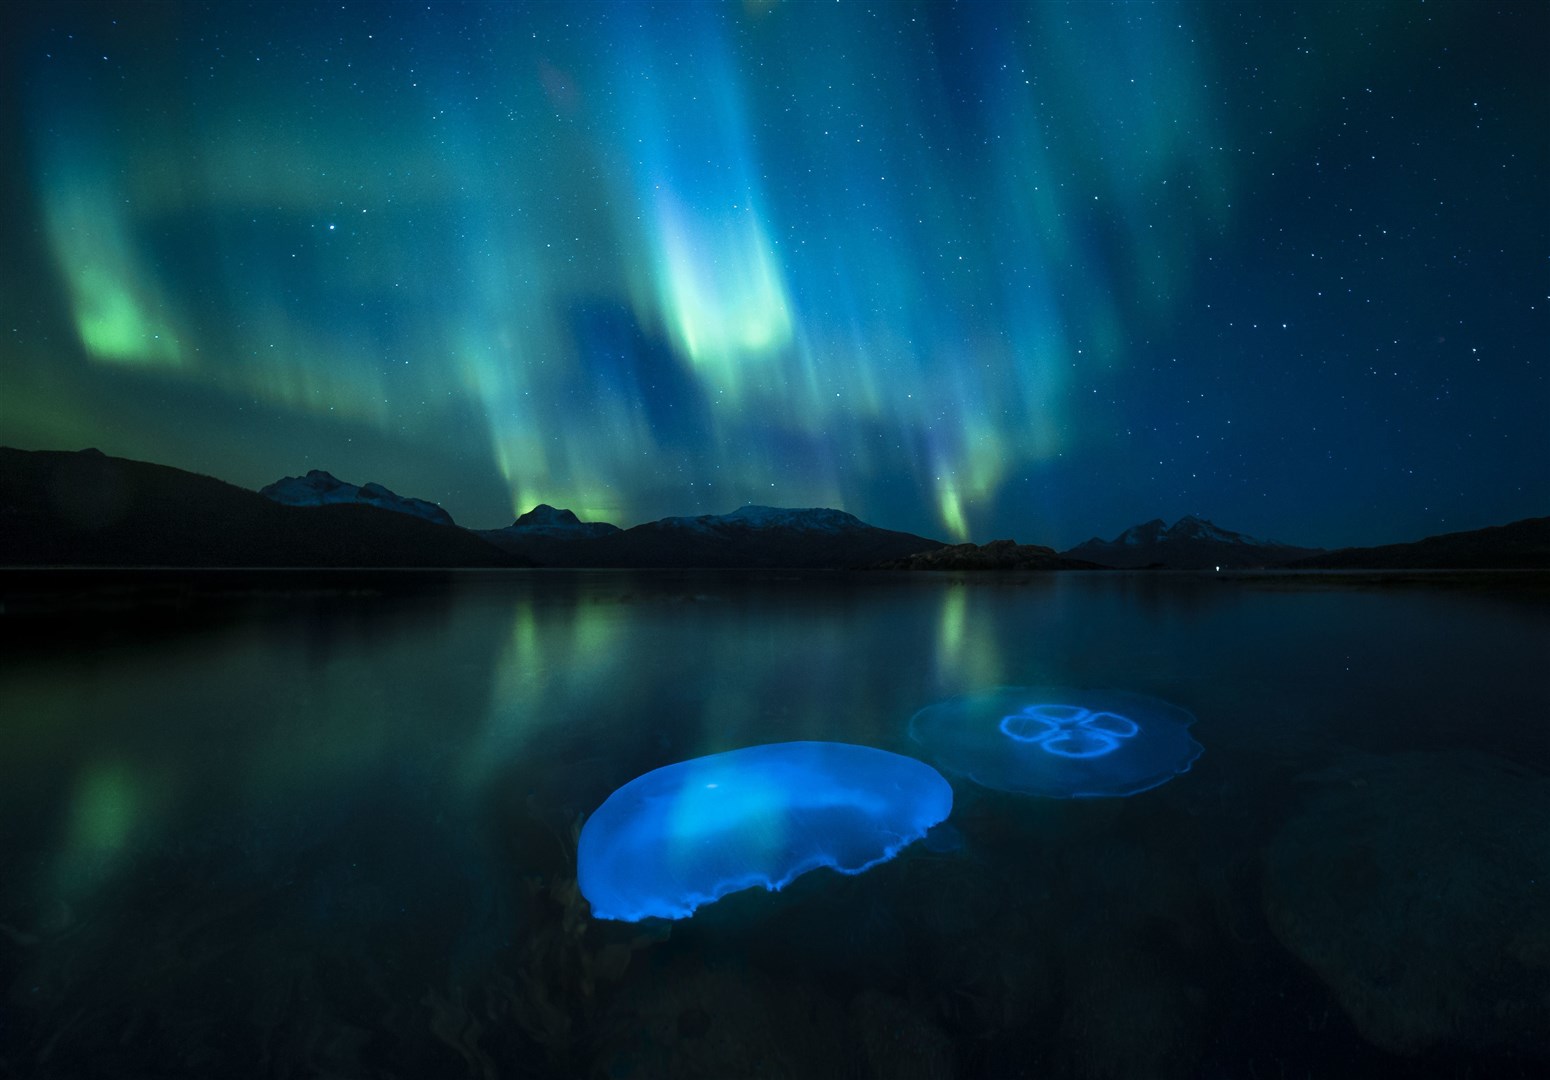 A Moon jellyfish swarm in the waters of a fjord outside Tromso in northern Norway illuminated by the aurora borealis (Audun Rikardsen/Wildlife Photographer of the Year/PA)